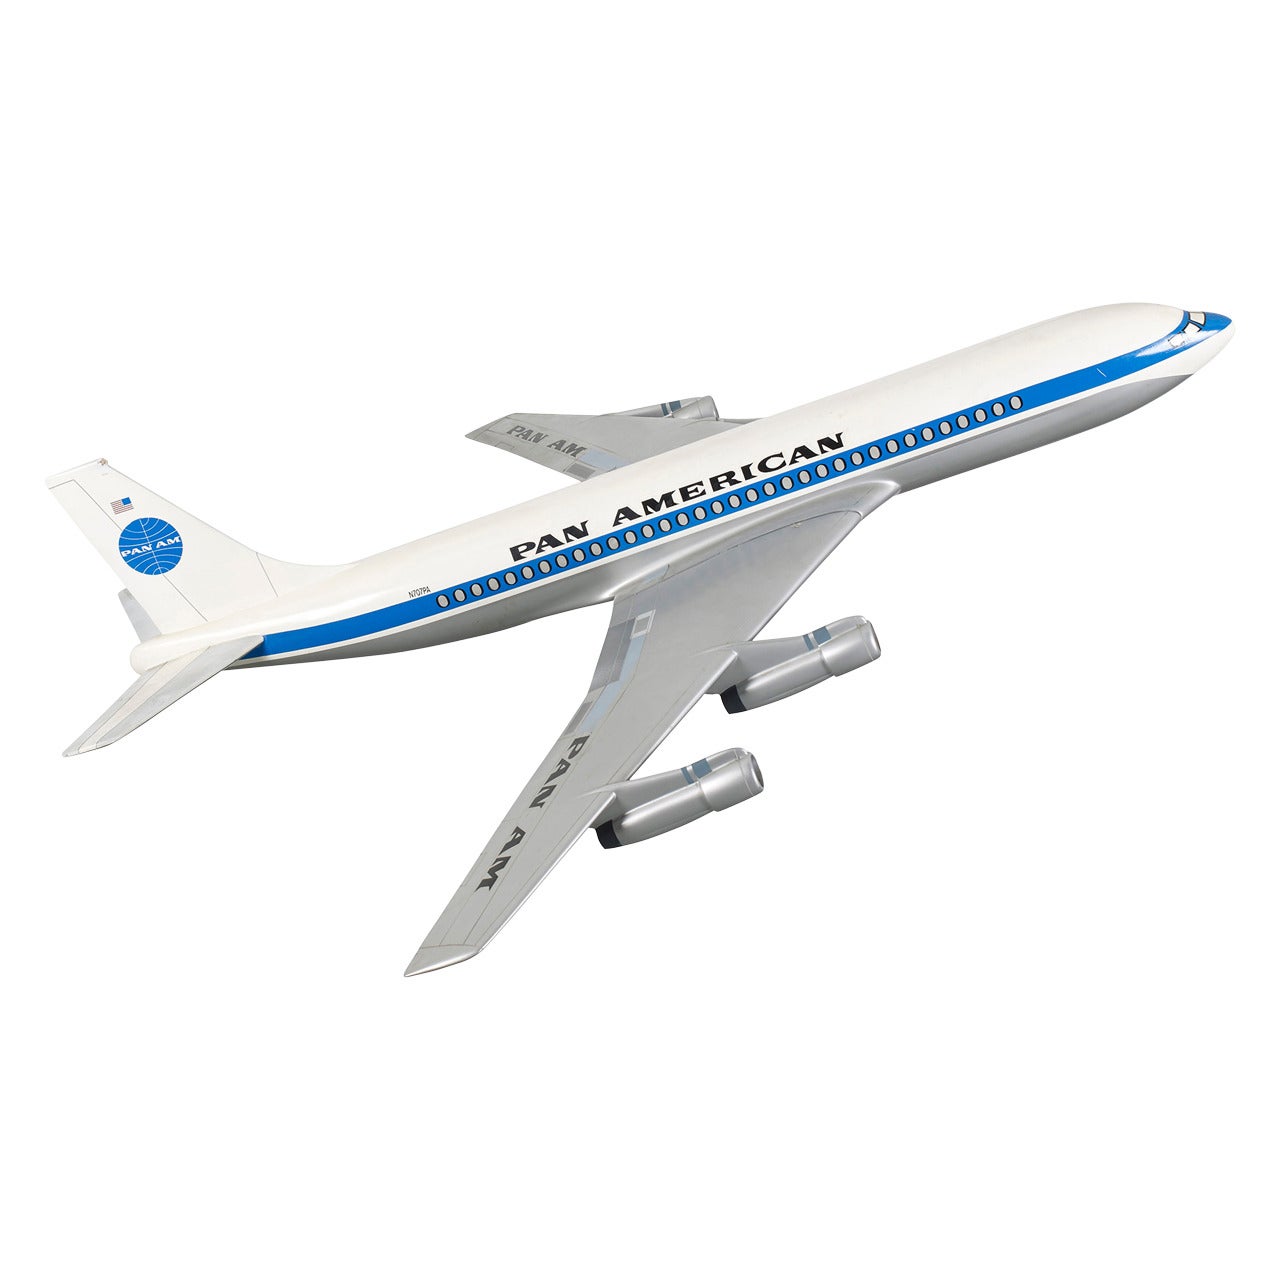 707 Manufacturer’s Promotional Model Airplane from Catch Me If You Can